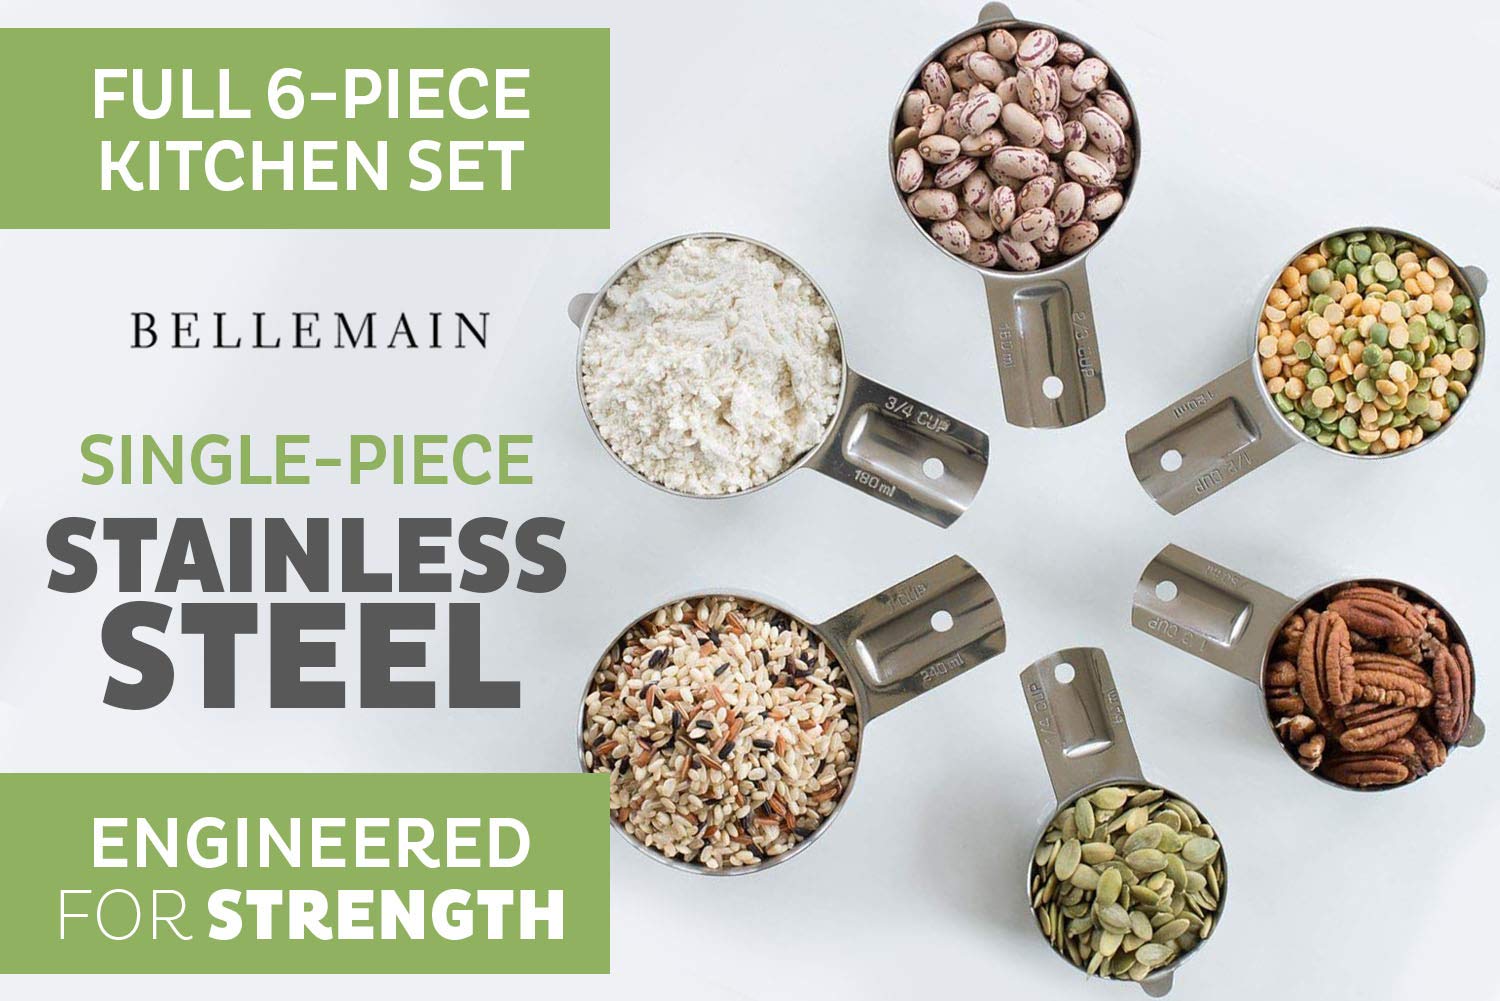 Bellemain Stainless Steel Measuring Cup Set, 6 Piece - $24.95